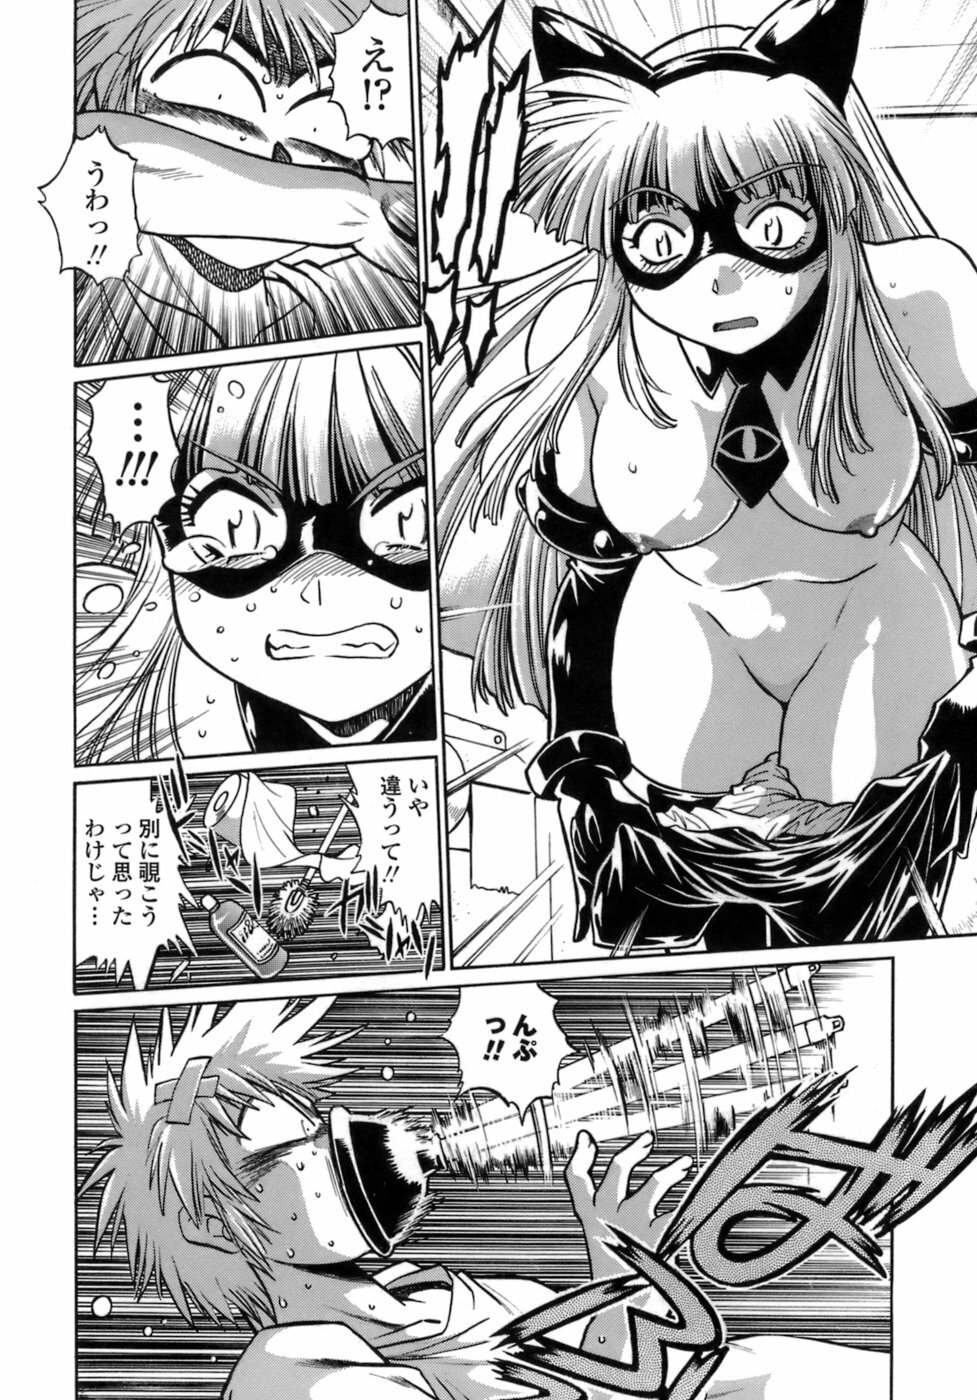 [Manabe Jouji] Tail Chaser 1 page 8 full